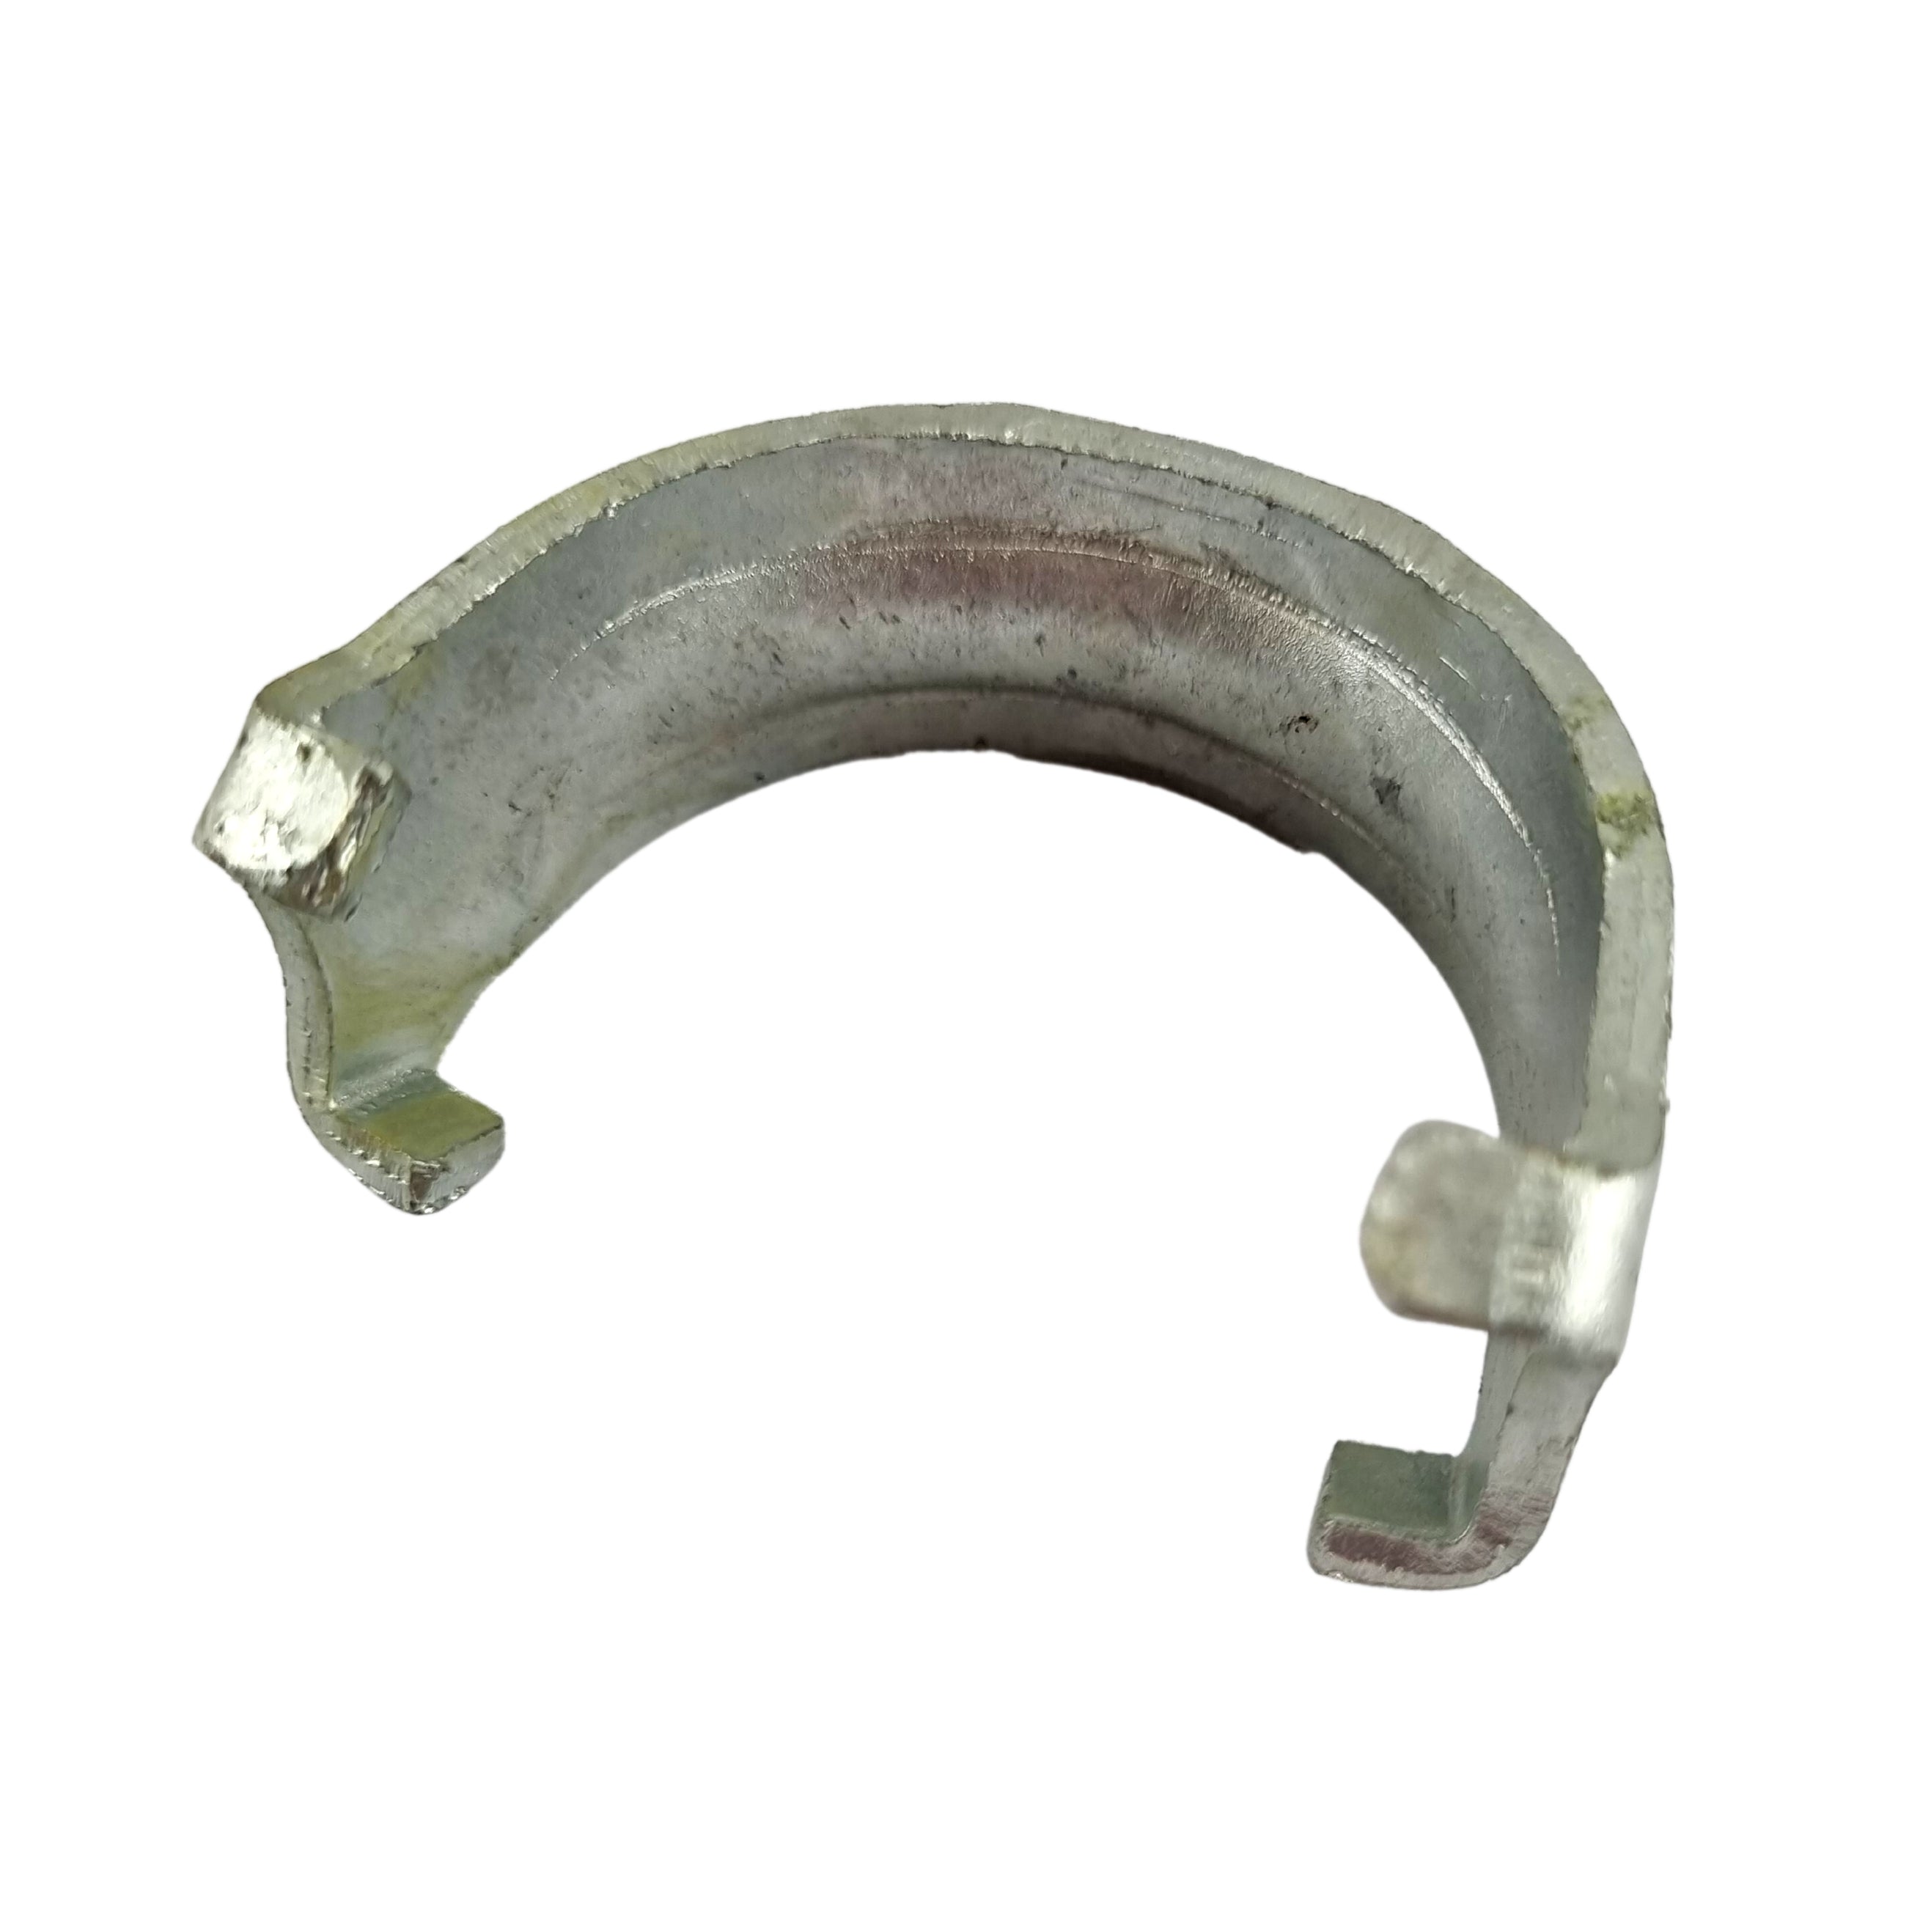 Universal Connector, Galvanised, UFFMPC. Australian made. Shop fence and gate fittings online at chain.com.au. Australia wide shipping.